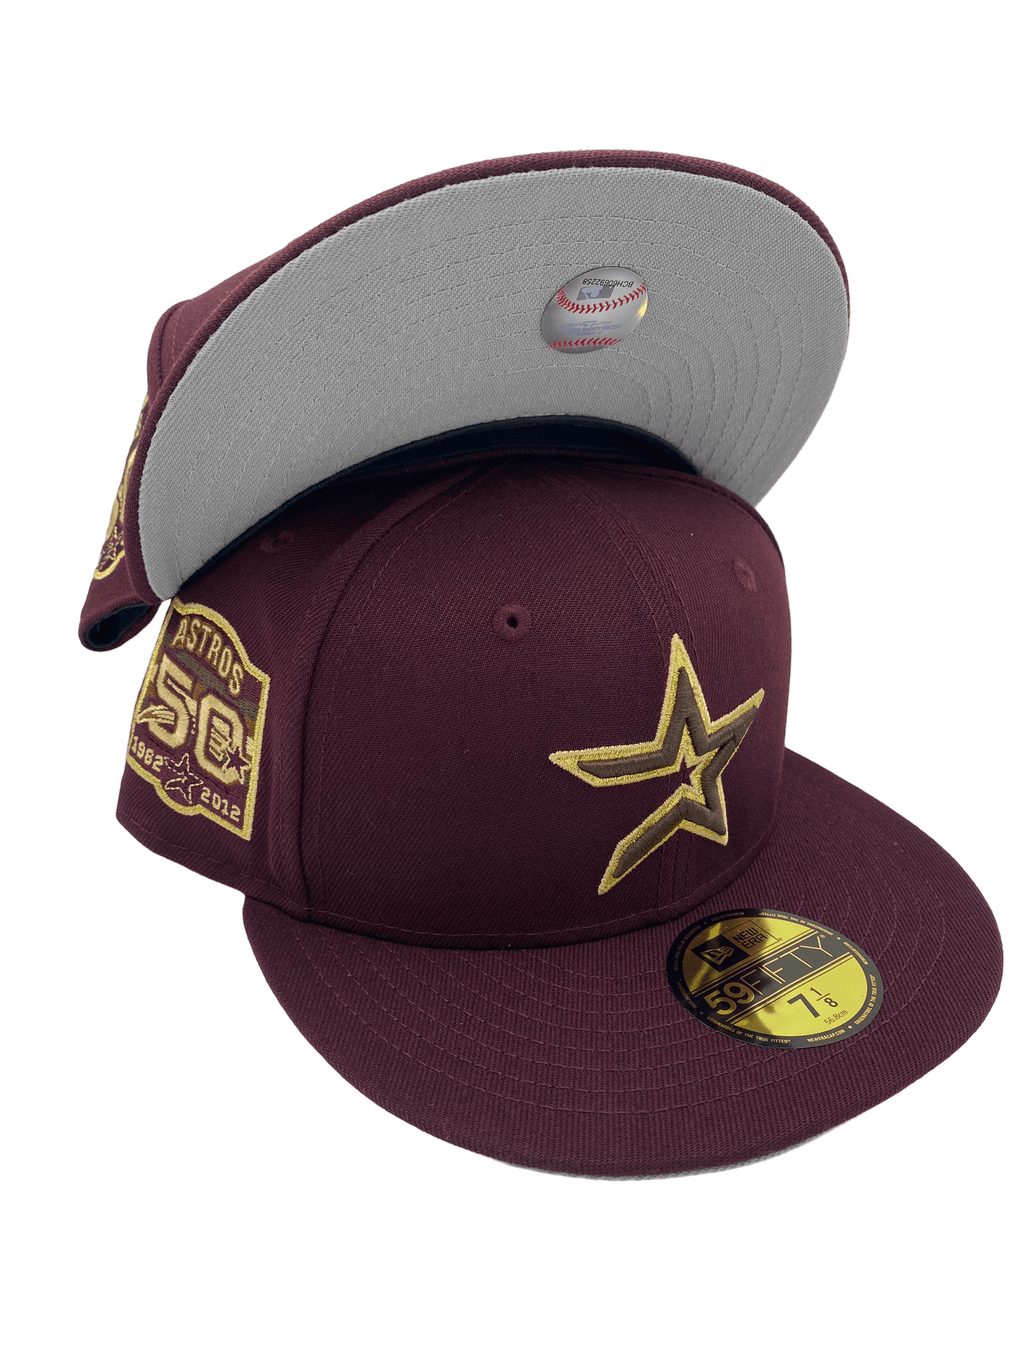 New Era Houston Astros 35 Years 59FIFTY Men's Fitted Hat Maroon-Baby Blue Maroon-Baby Blue / 7 1/2